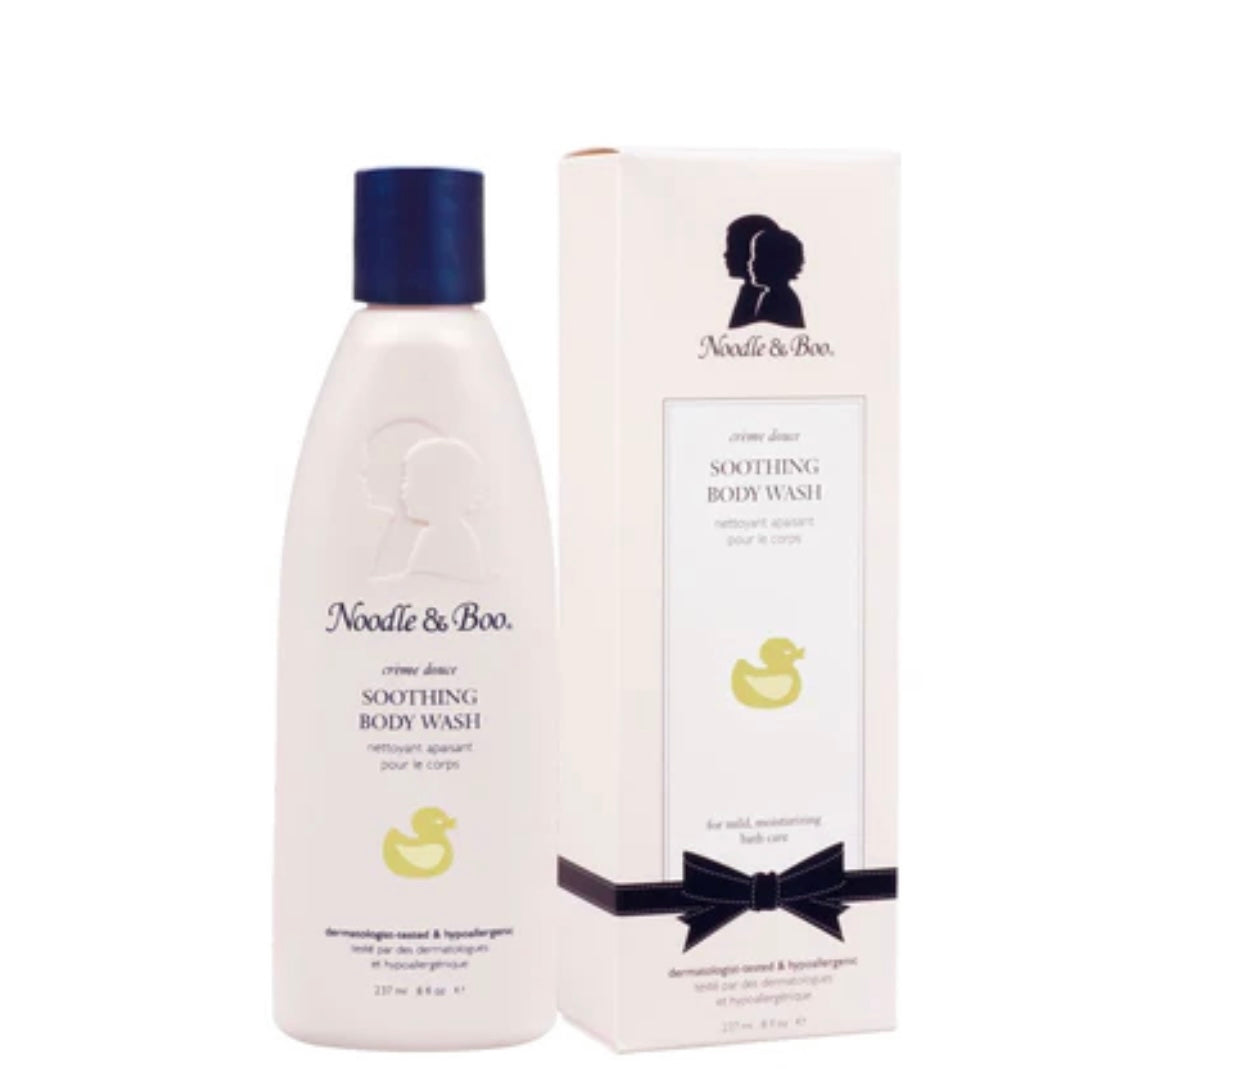 Noodle and boo soothing body wash